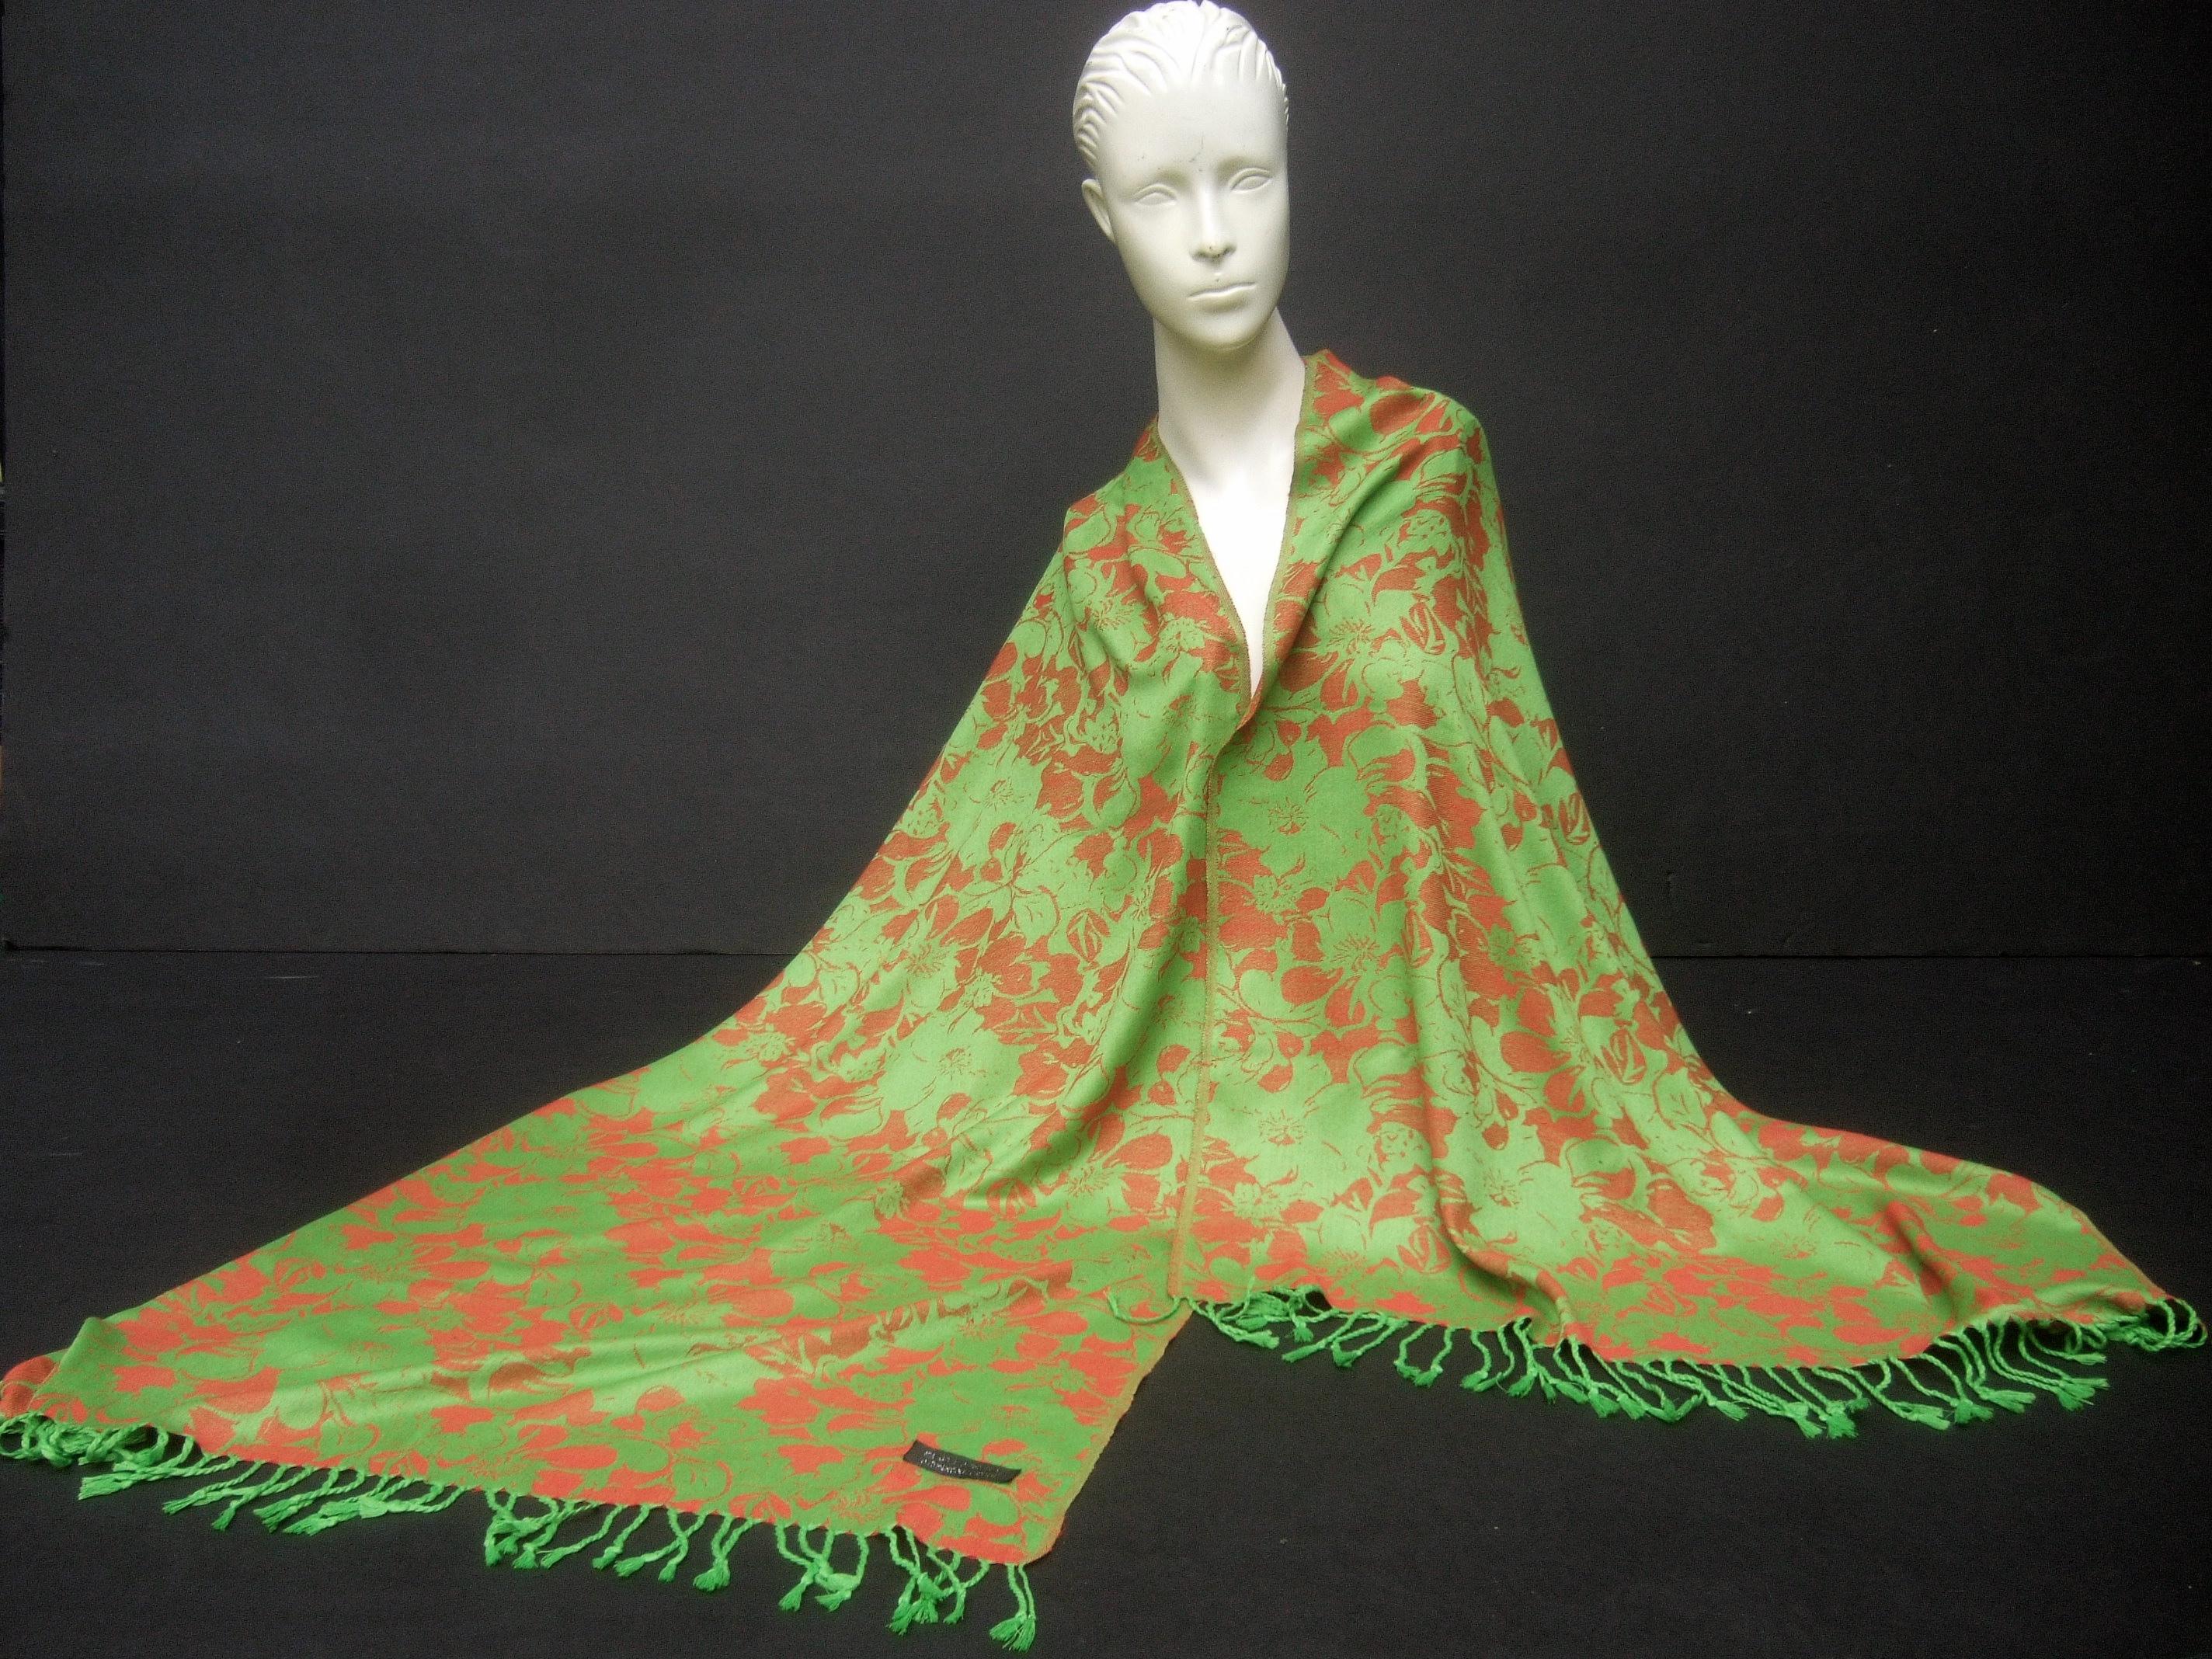 Cashmere Floral Print Fringe Shawl Wrap 74 x 27 in Circa 21st c For Sale 3